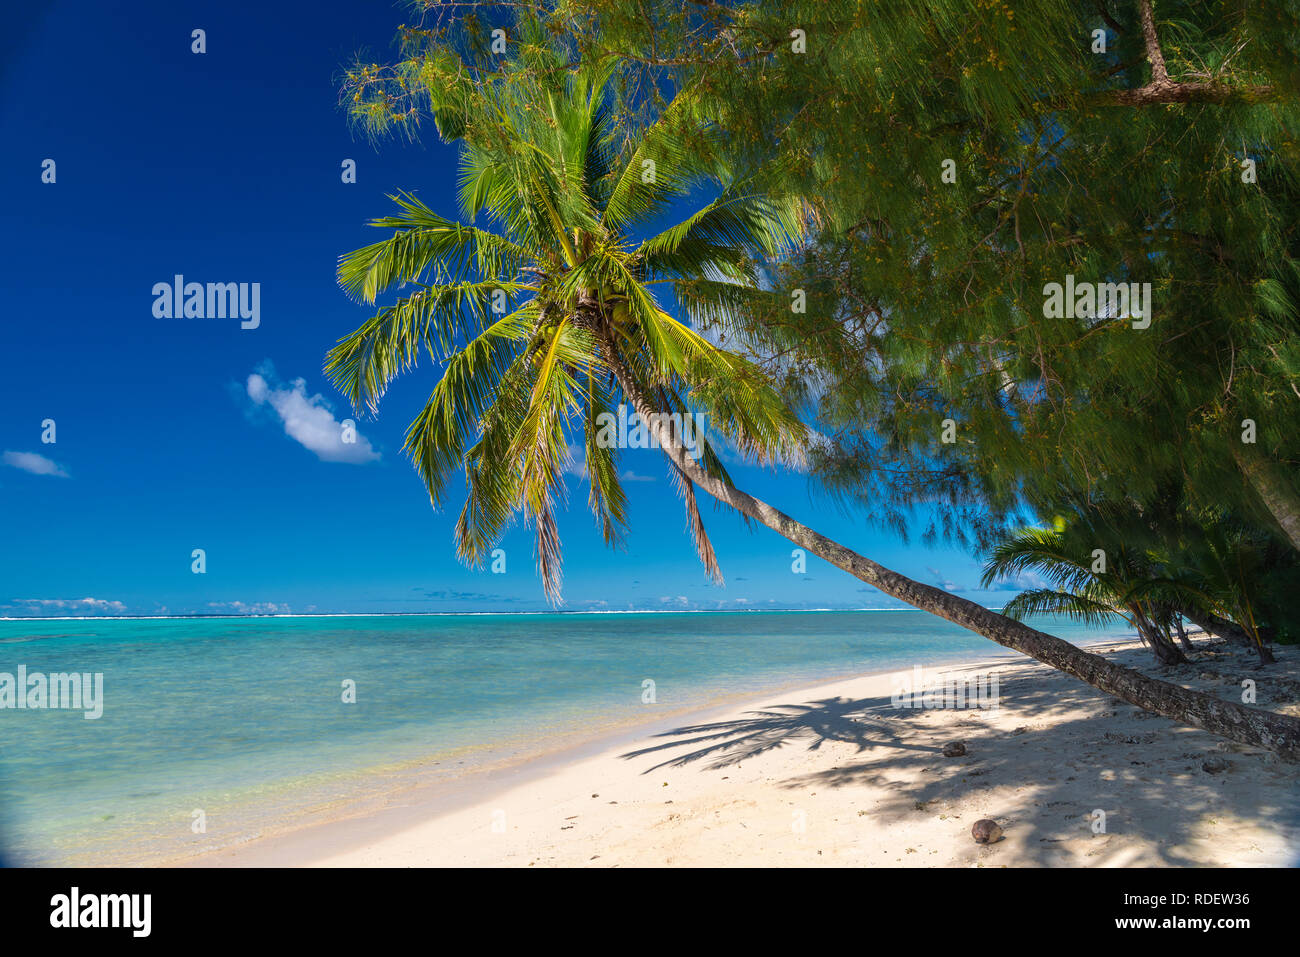 Beautiful tropical beach with coconut palm tree overhanging an idyllic white sandy beach on the  island of Aitutaki,  Cook Islands, South Pacific Stock Photo